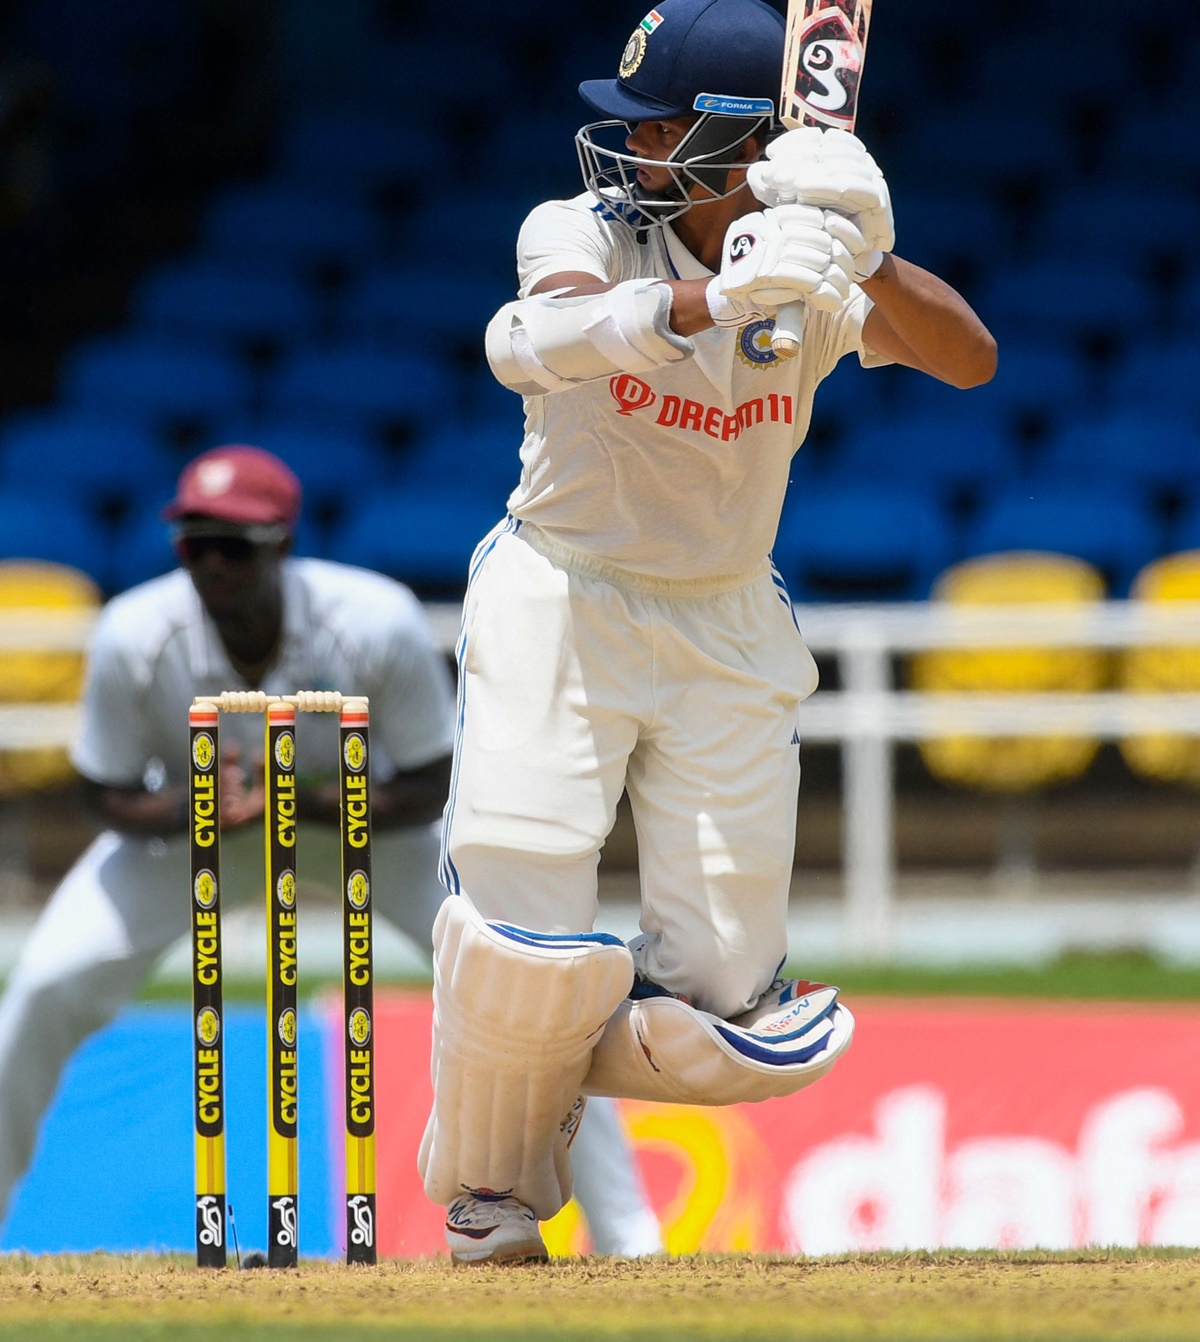 Yashasvi Jaiswal notched up a fifty in the 1st innings of the 2nd Test to follow up on his remarkable 171 on his Test debut.